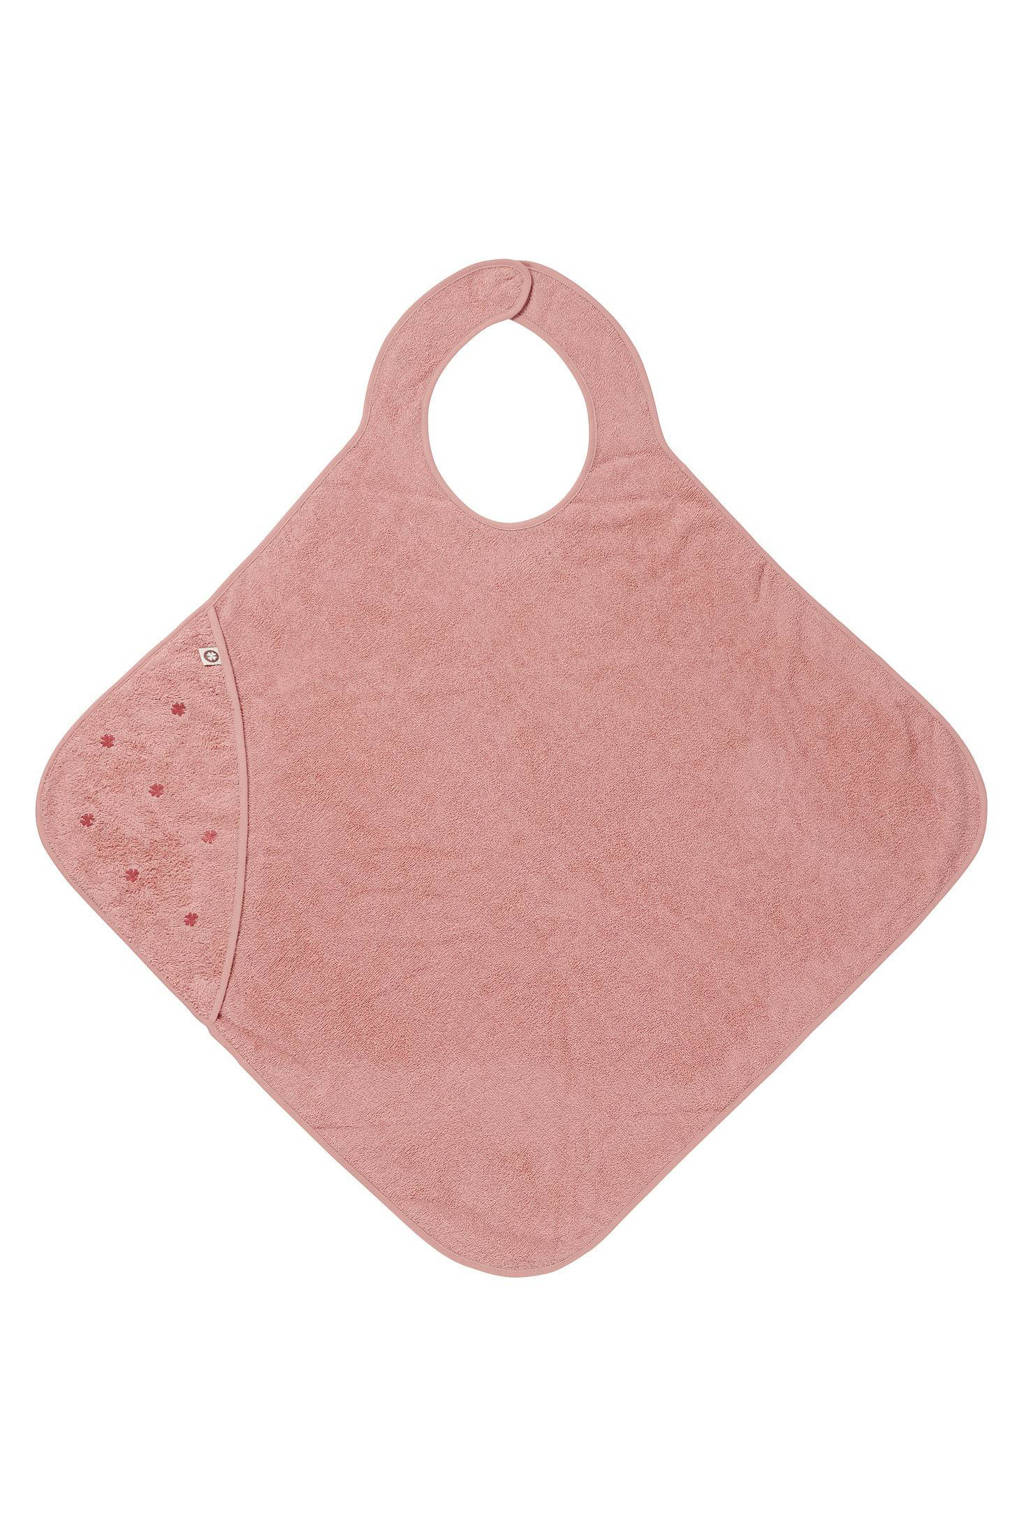 Noppies Baby Comfort Wearable Clover Terry badcape 105x110 cm Misty Rose, Roze